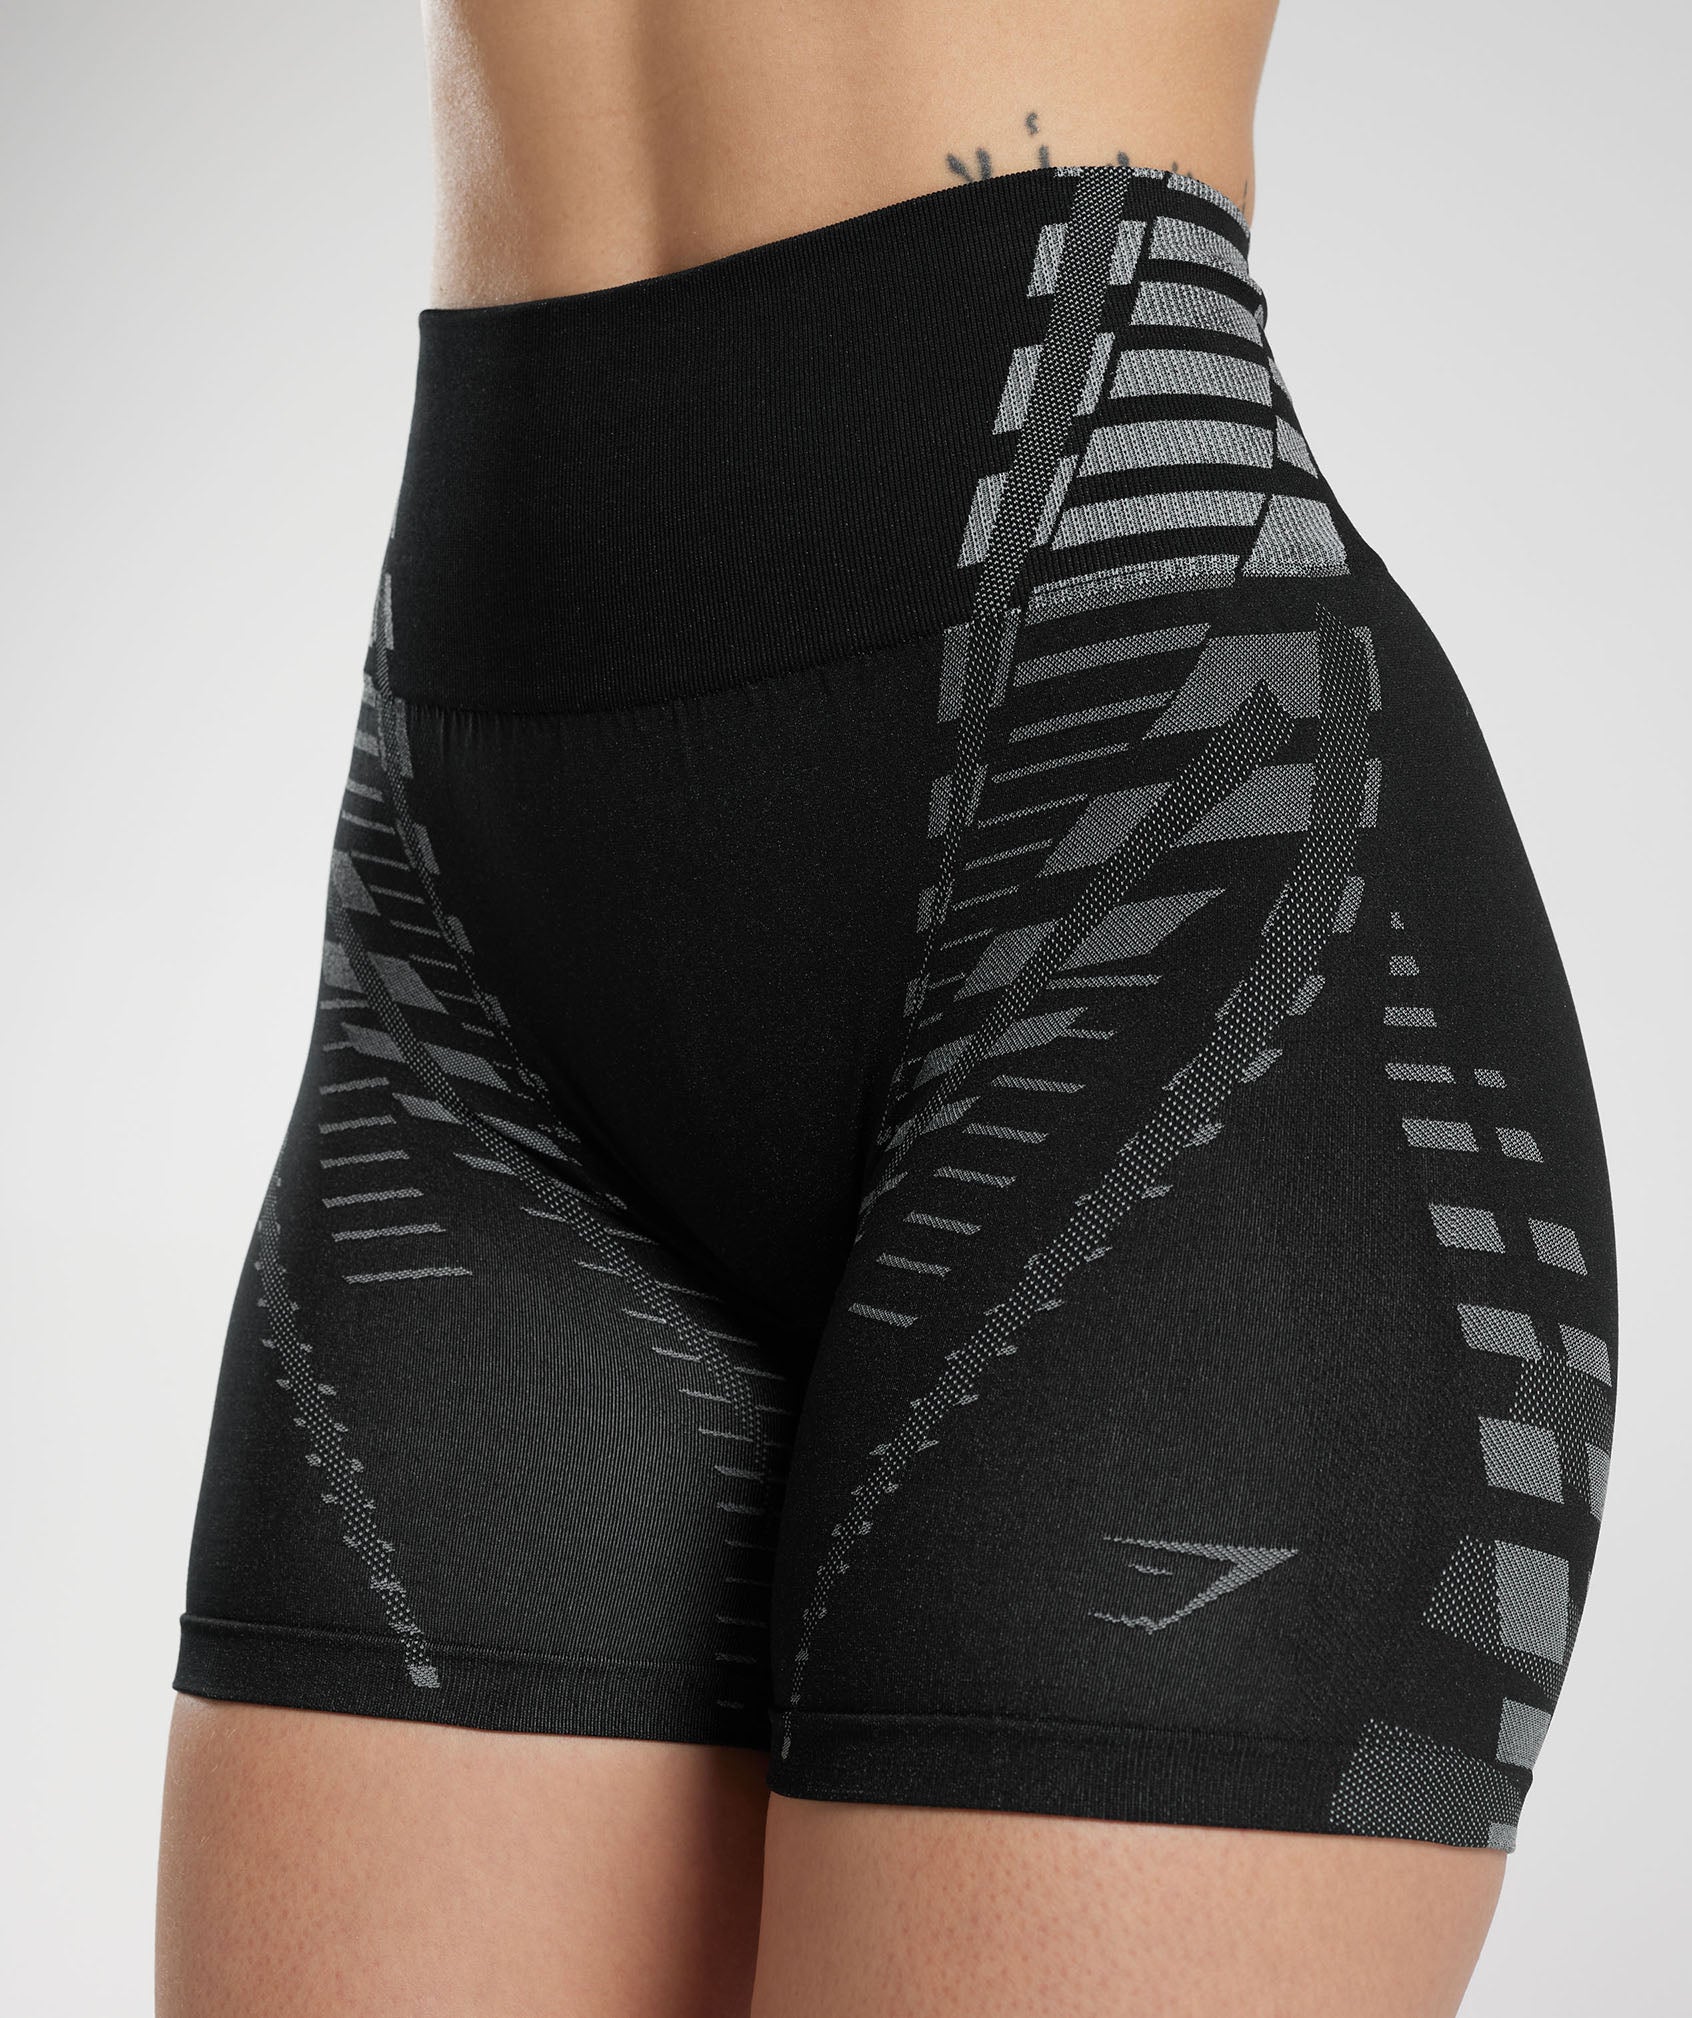 Apex Limit Shorts in Black/Light Grey - view 6